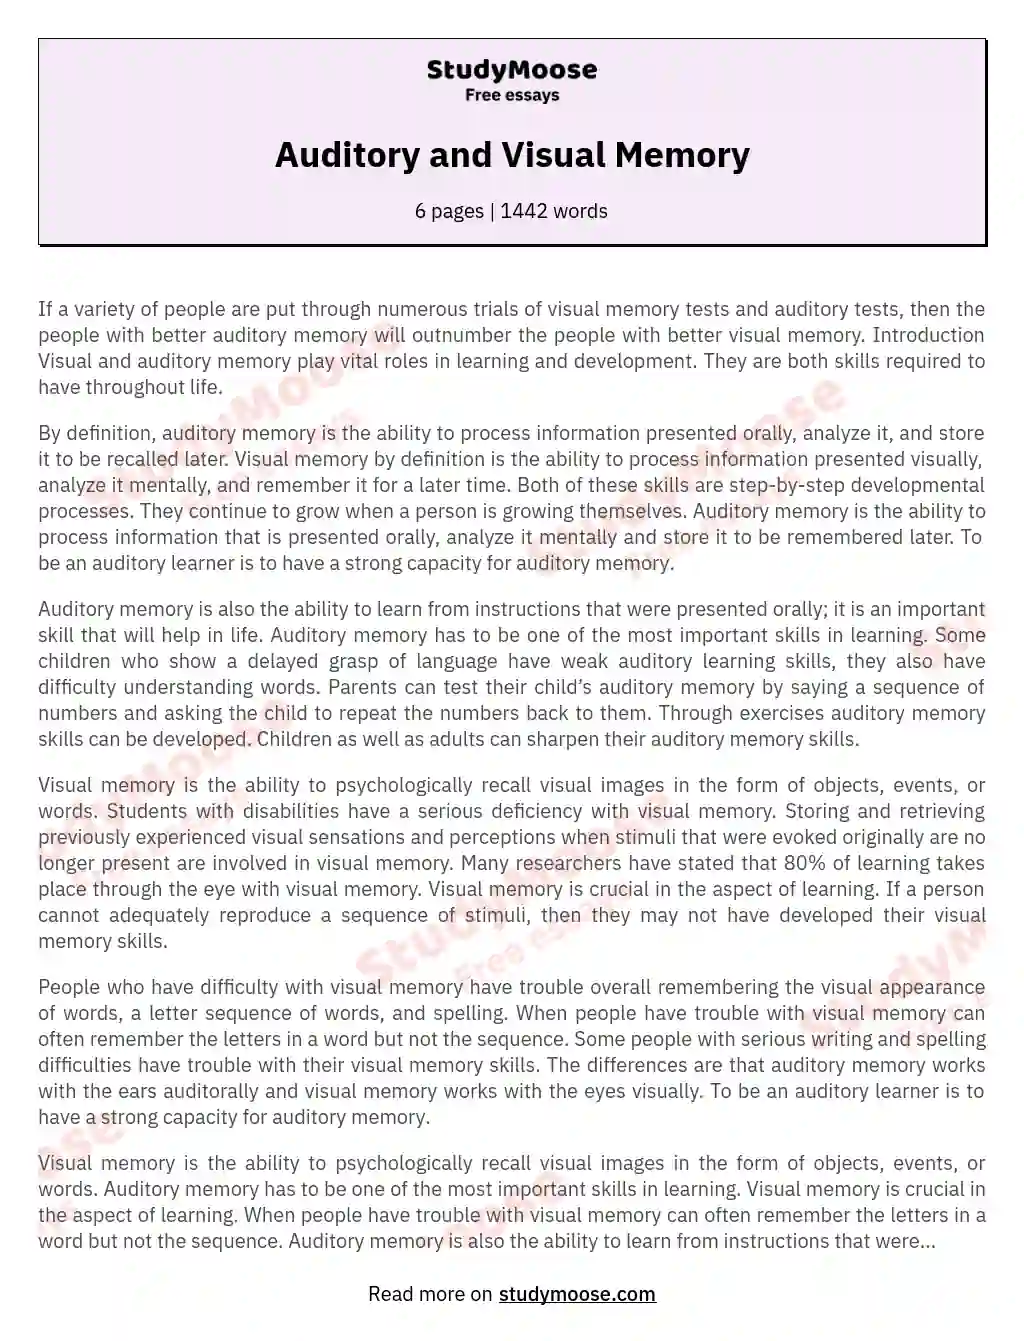 Auditory and Visual Memory essay